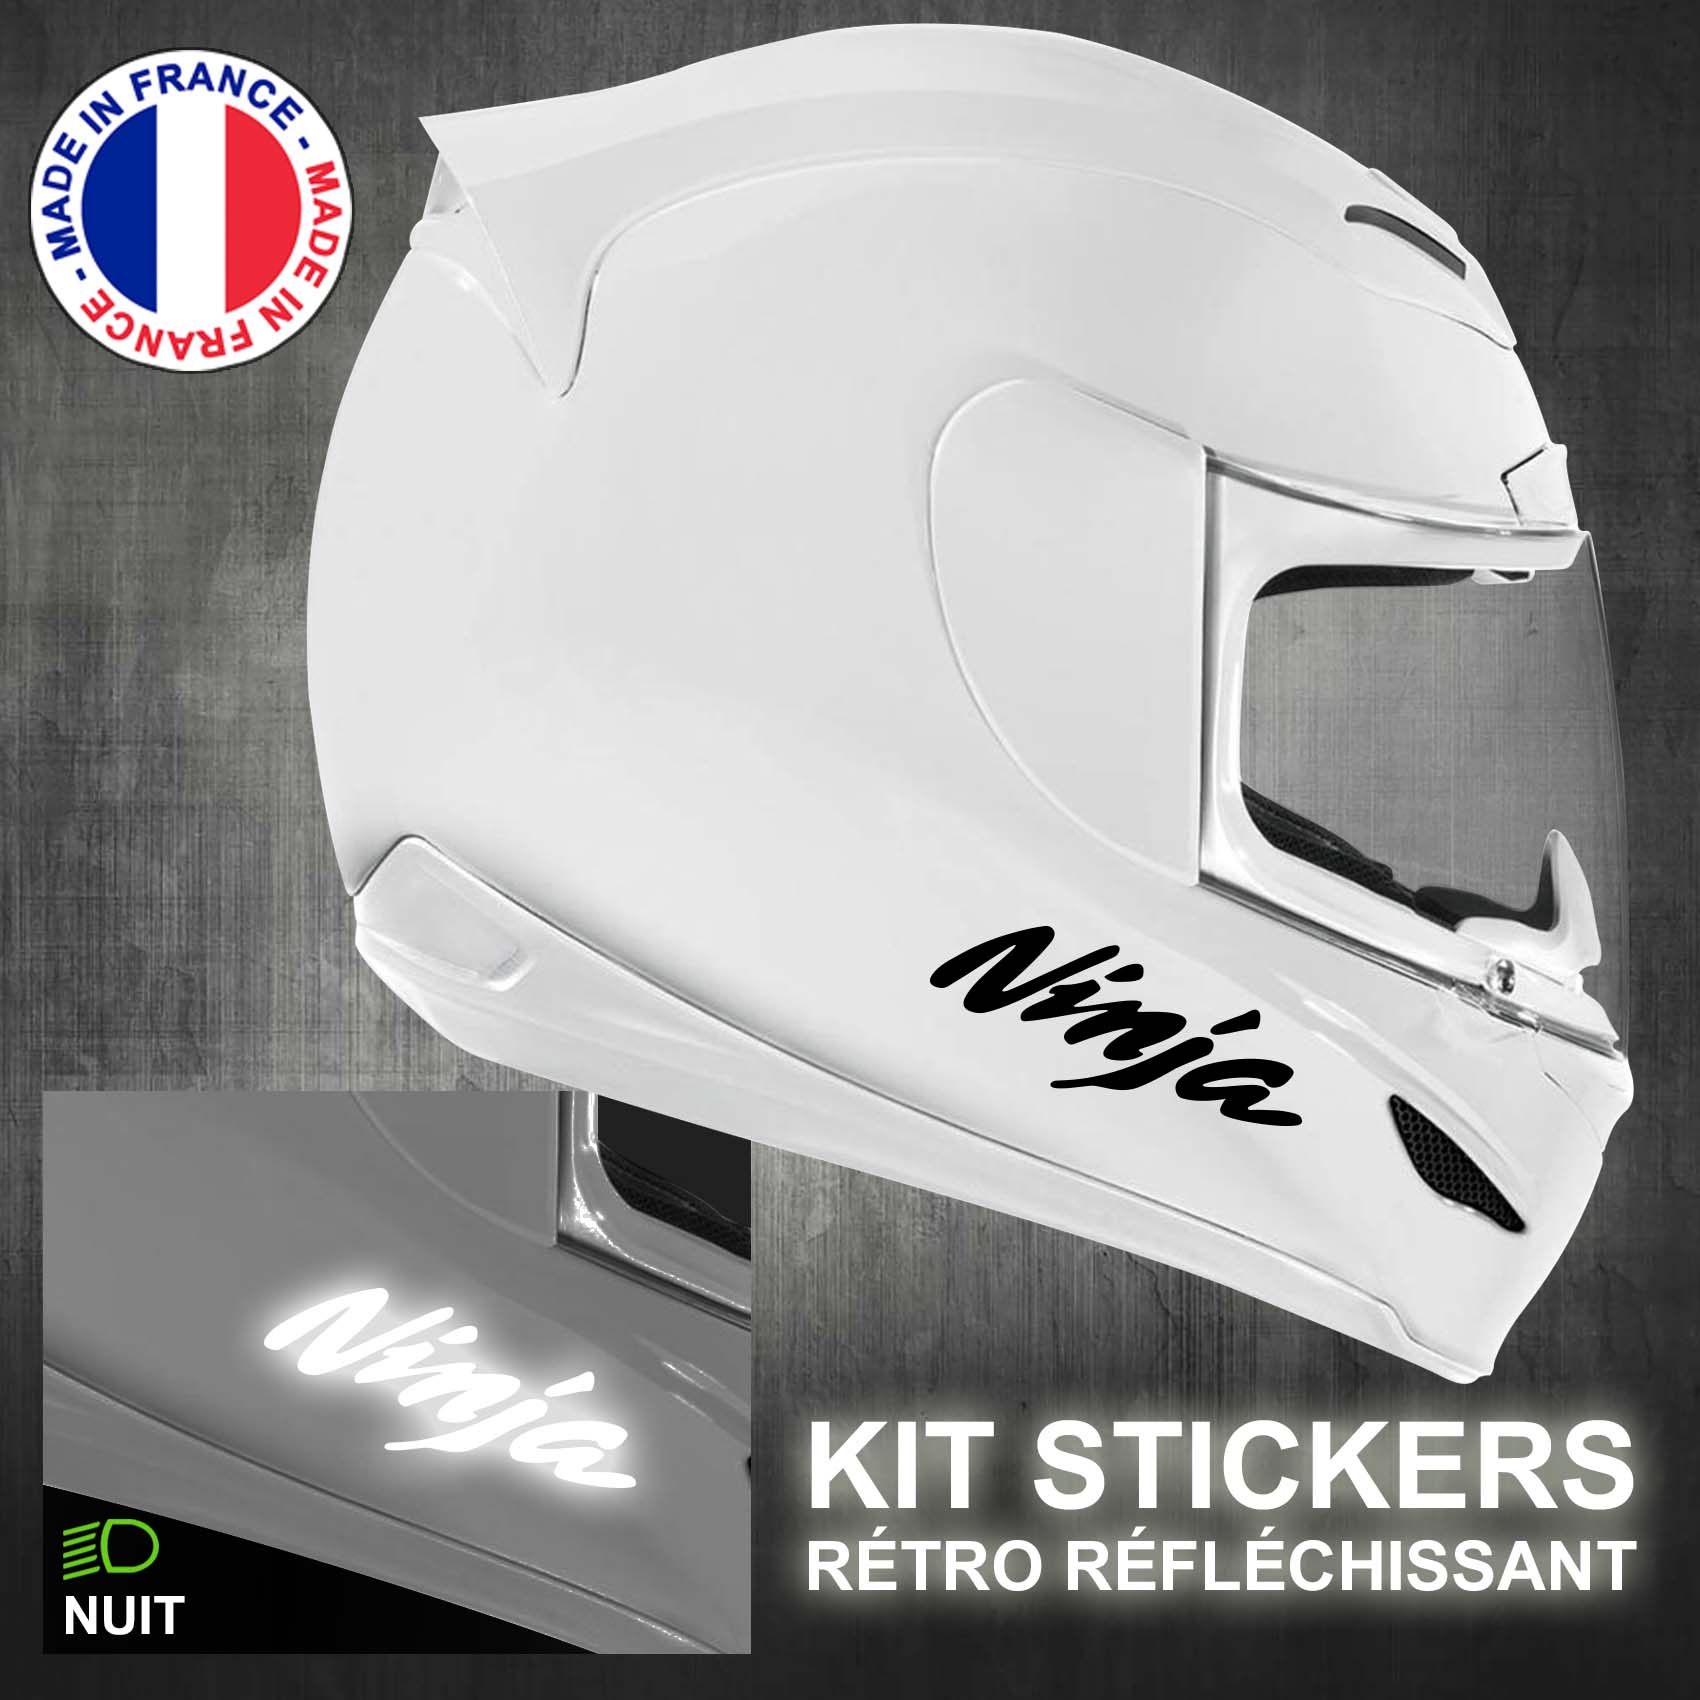 stickers-casque-moto-ninja-kawasaki-ref1-retro-reflechissant-autocollant-moto-velo-tuning-racing-route-sticker-casques-adhesif-scooter-nuit-securite-decals-personnalise-personnalisable-min